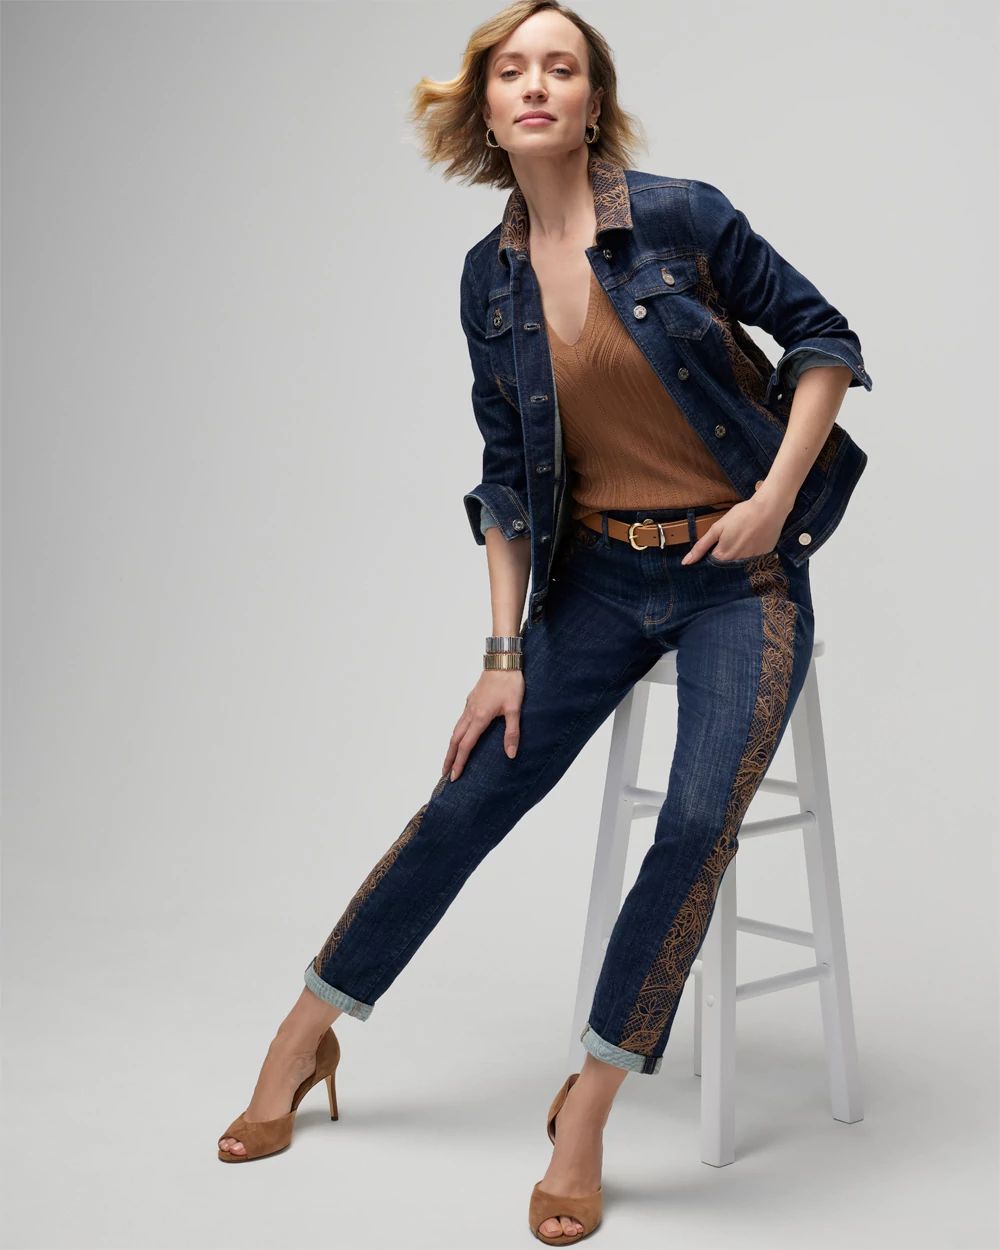 Mid-Rise Everyday Soft Denim  Embellished Girlfriend Jeans click to view larger image.